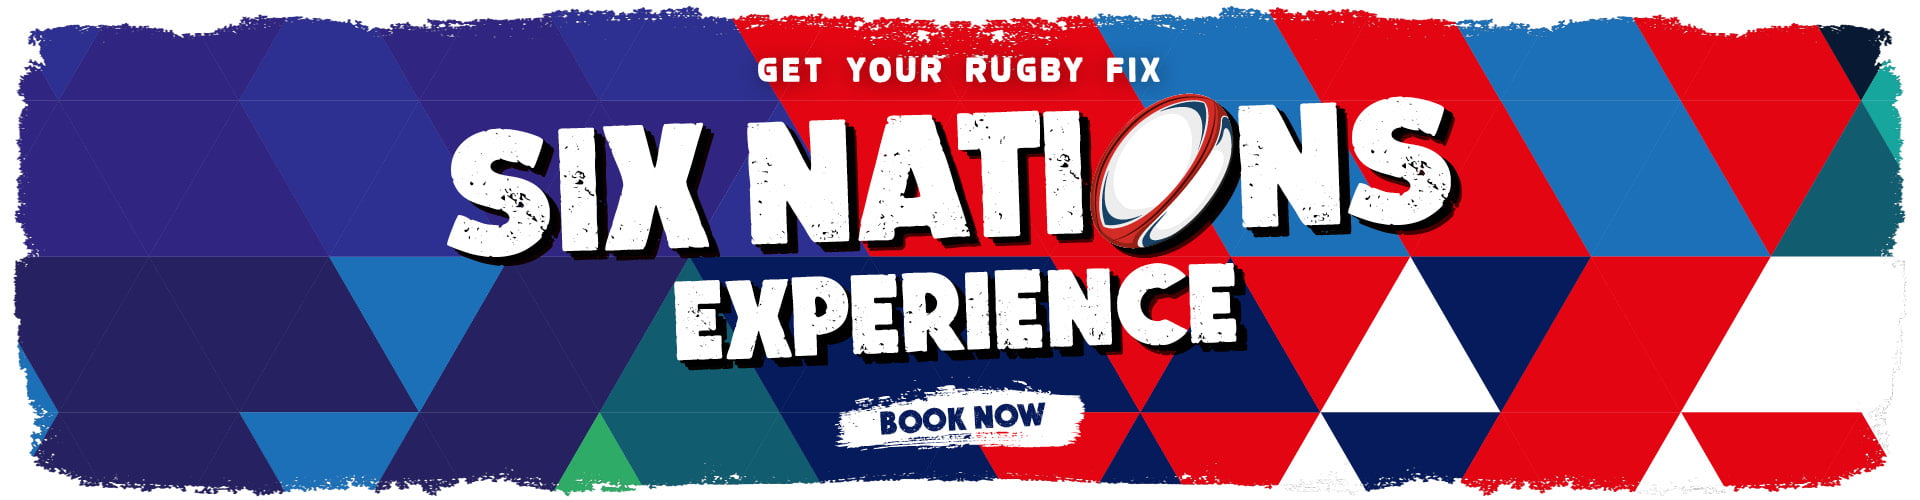 Rugby Six Nations Live at Walkabout